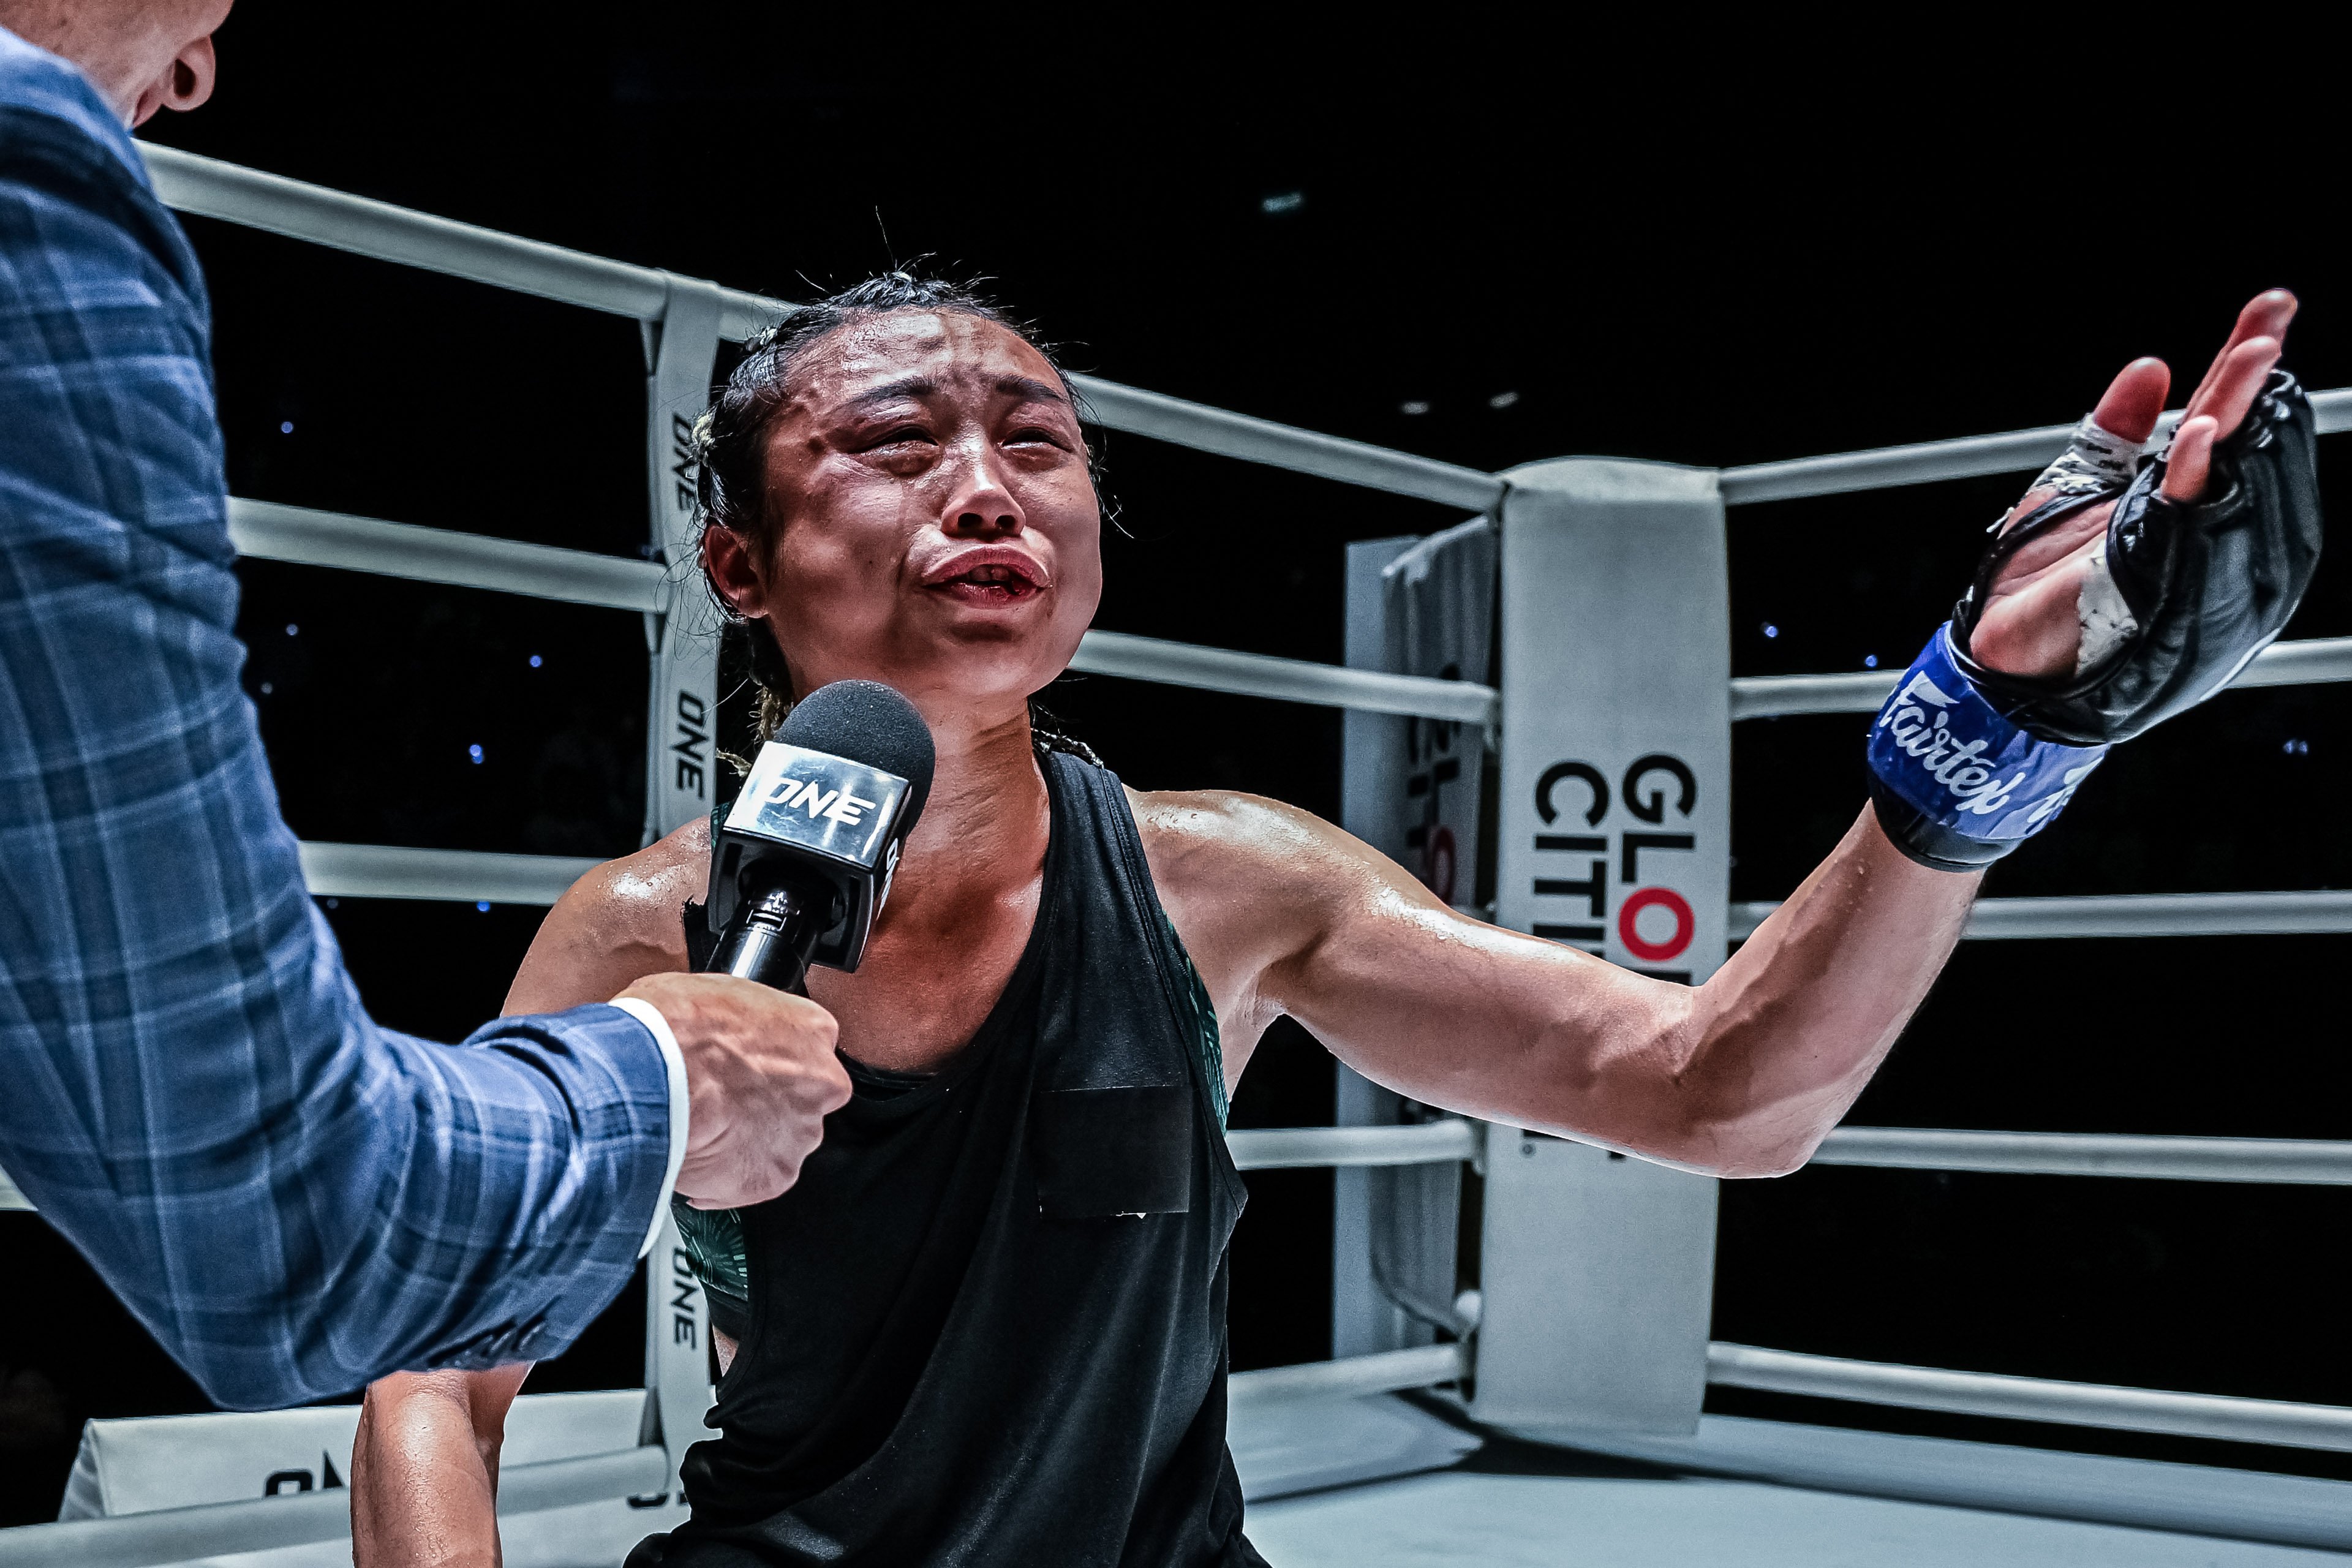 Yu Yau Pui breaks down in tears after being awarded a US$100,000 ONE contract. Photos: ONE Championship